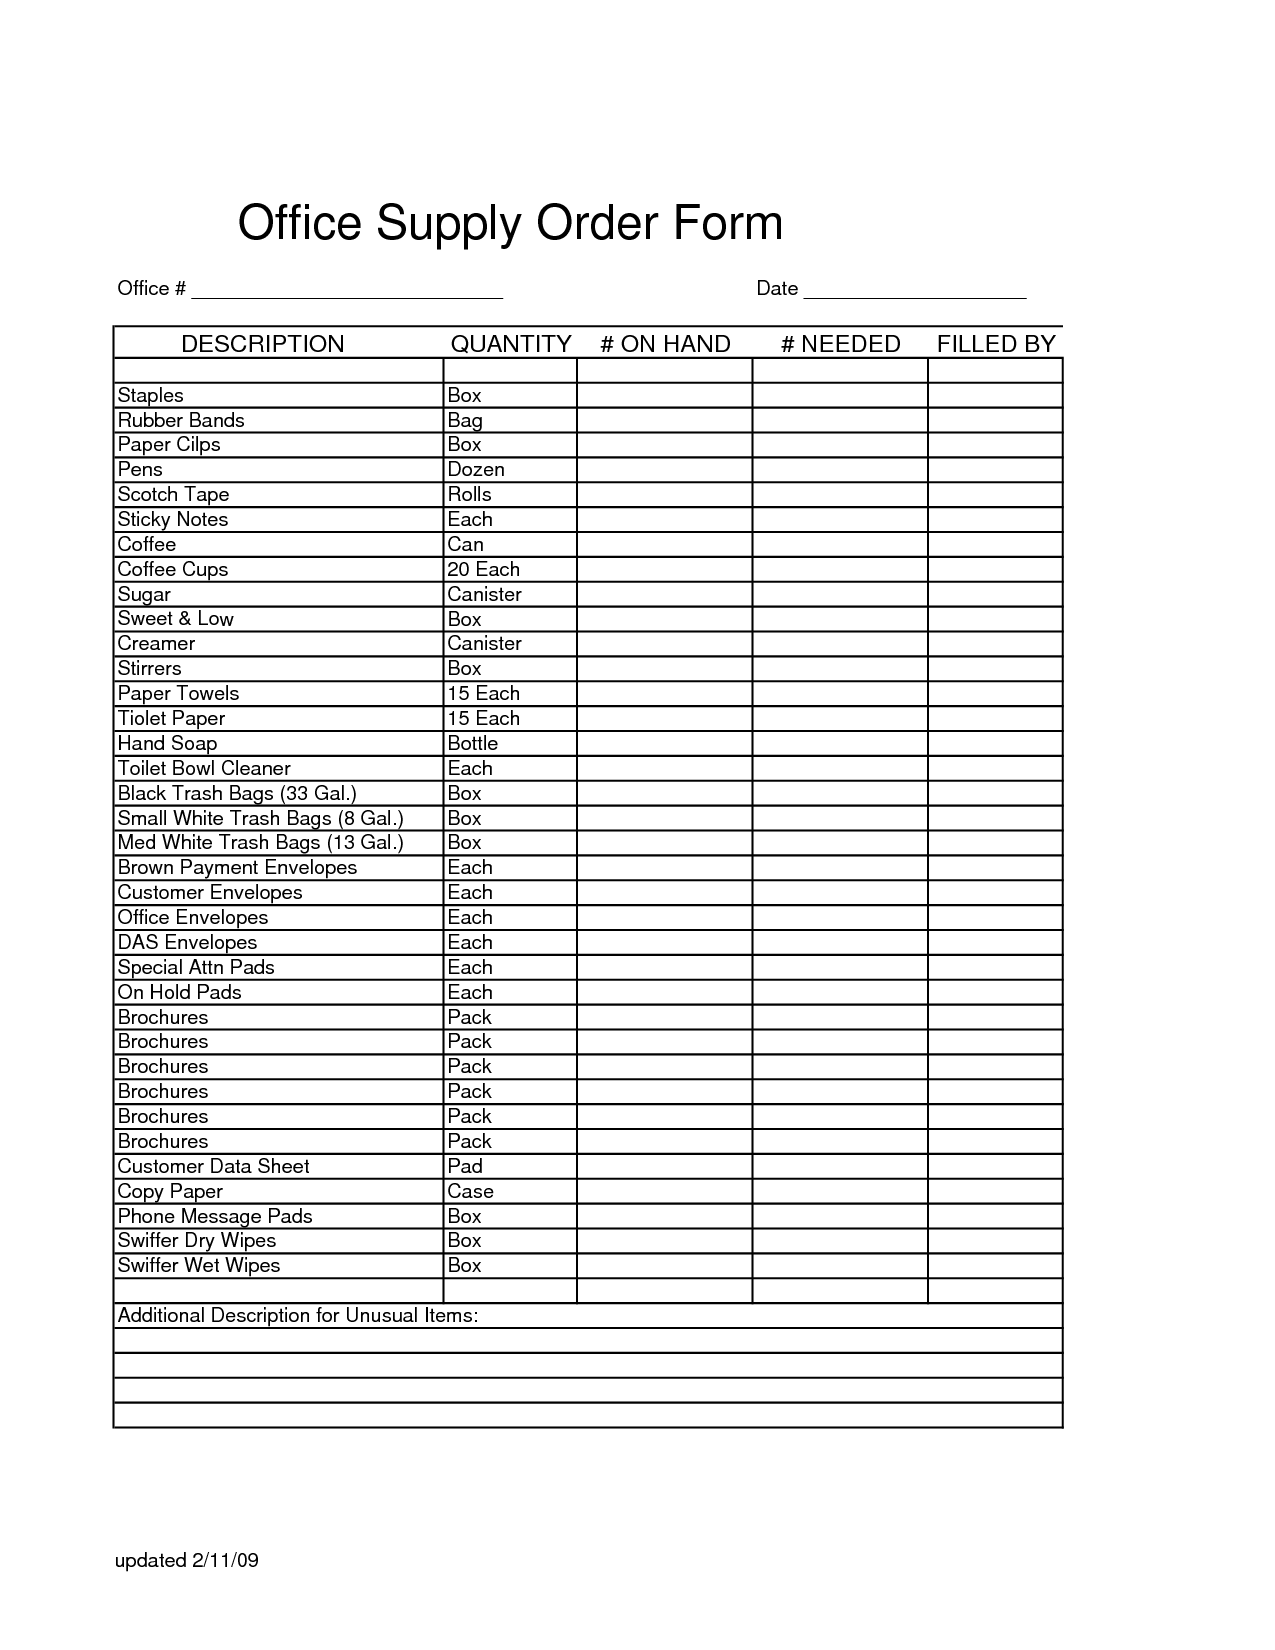 Office Supply Order Form Template charlotte clergy coalition